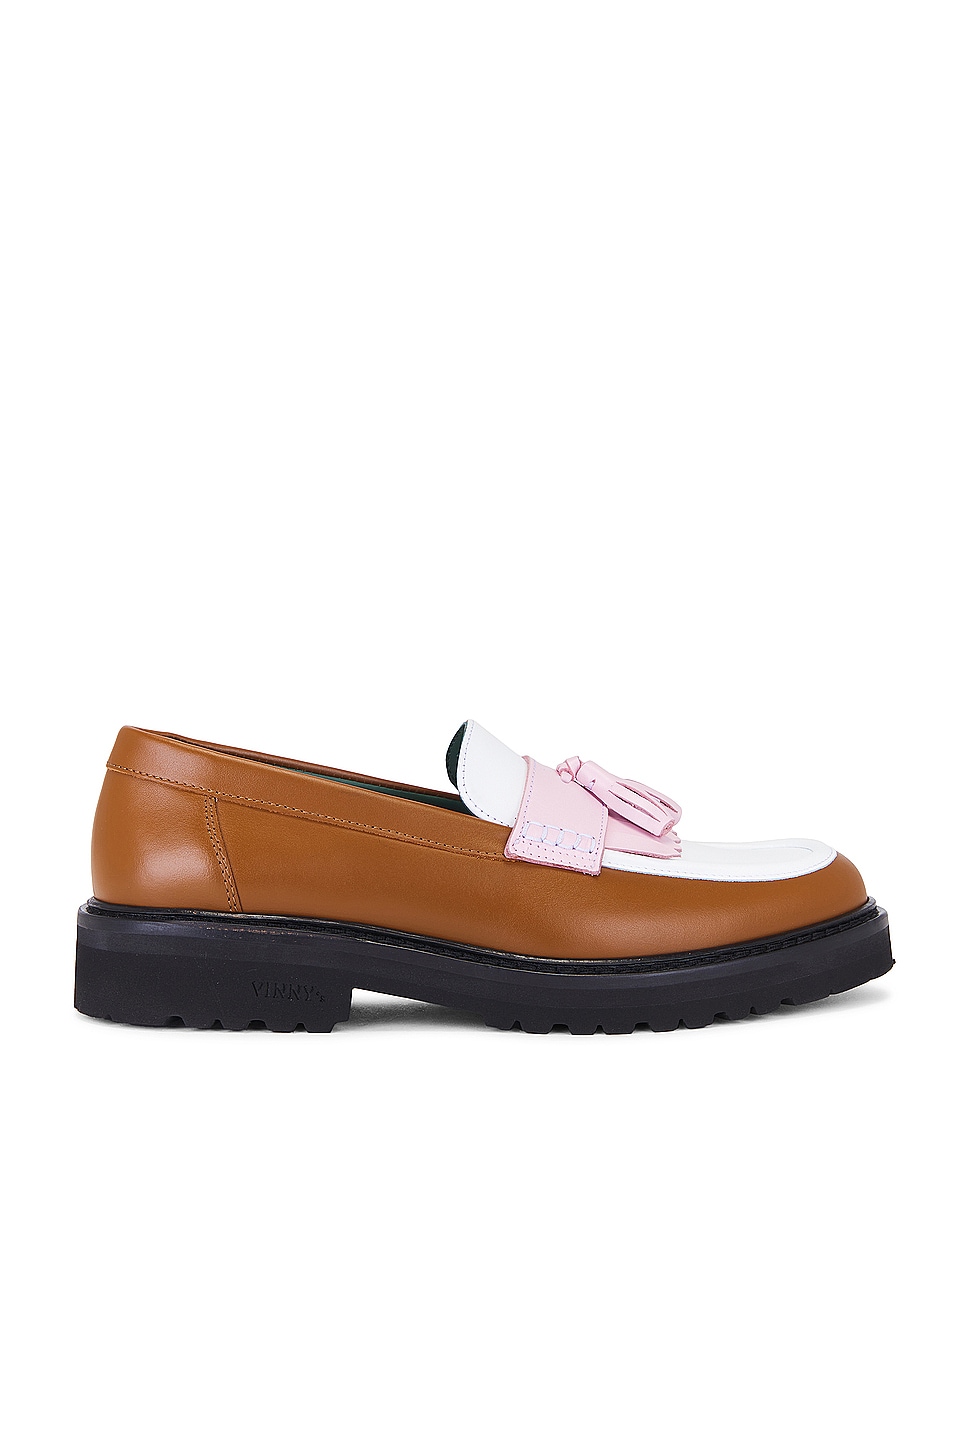 Image 1 of Vinny's Richee Tri-tone Tassel Loafer in Leather Brown